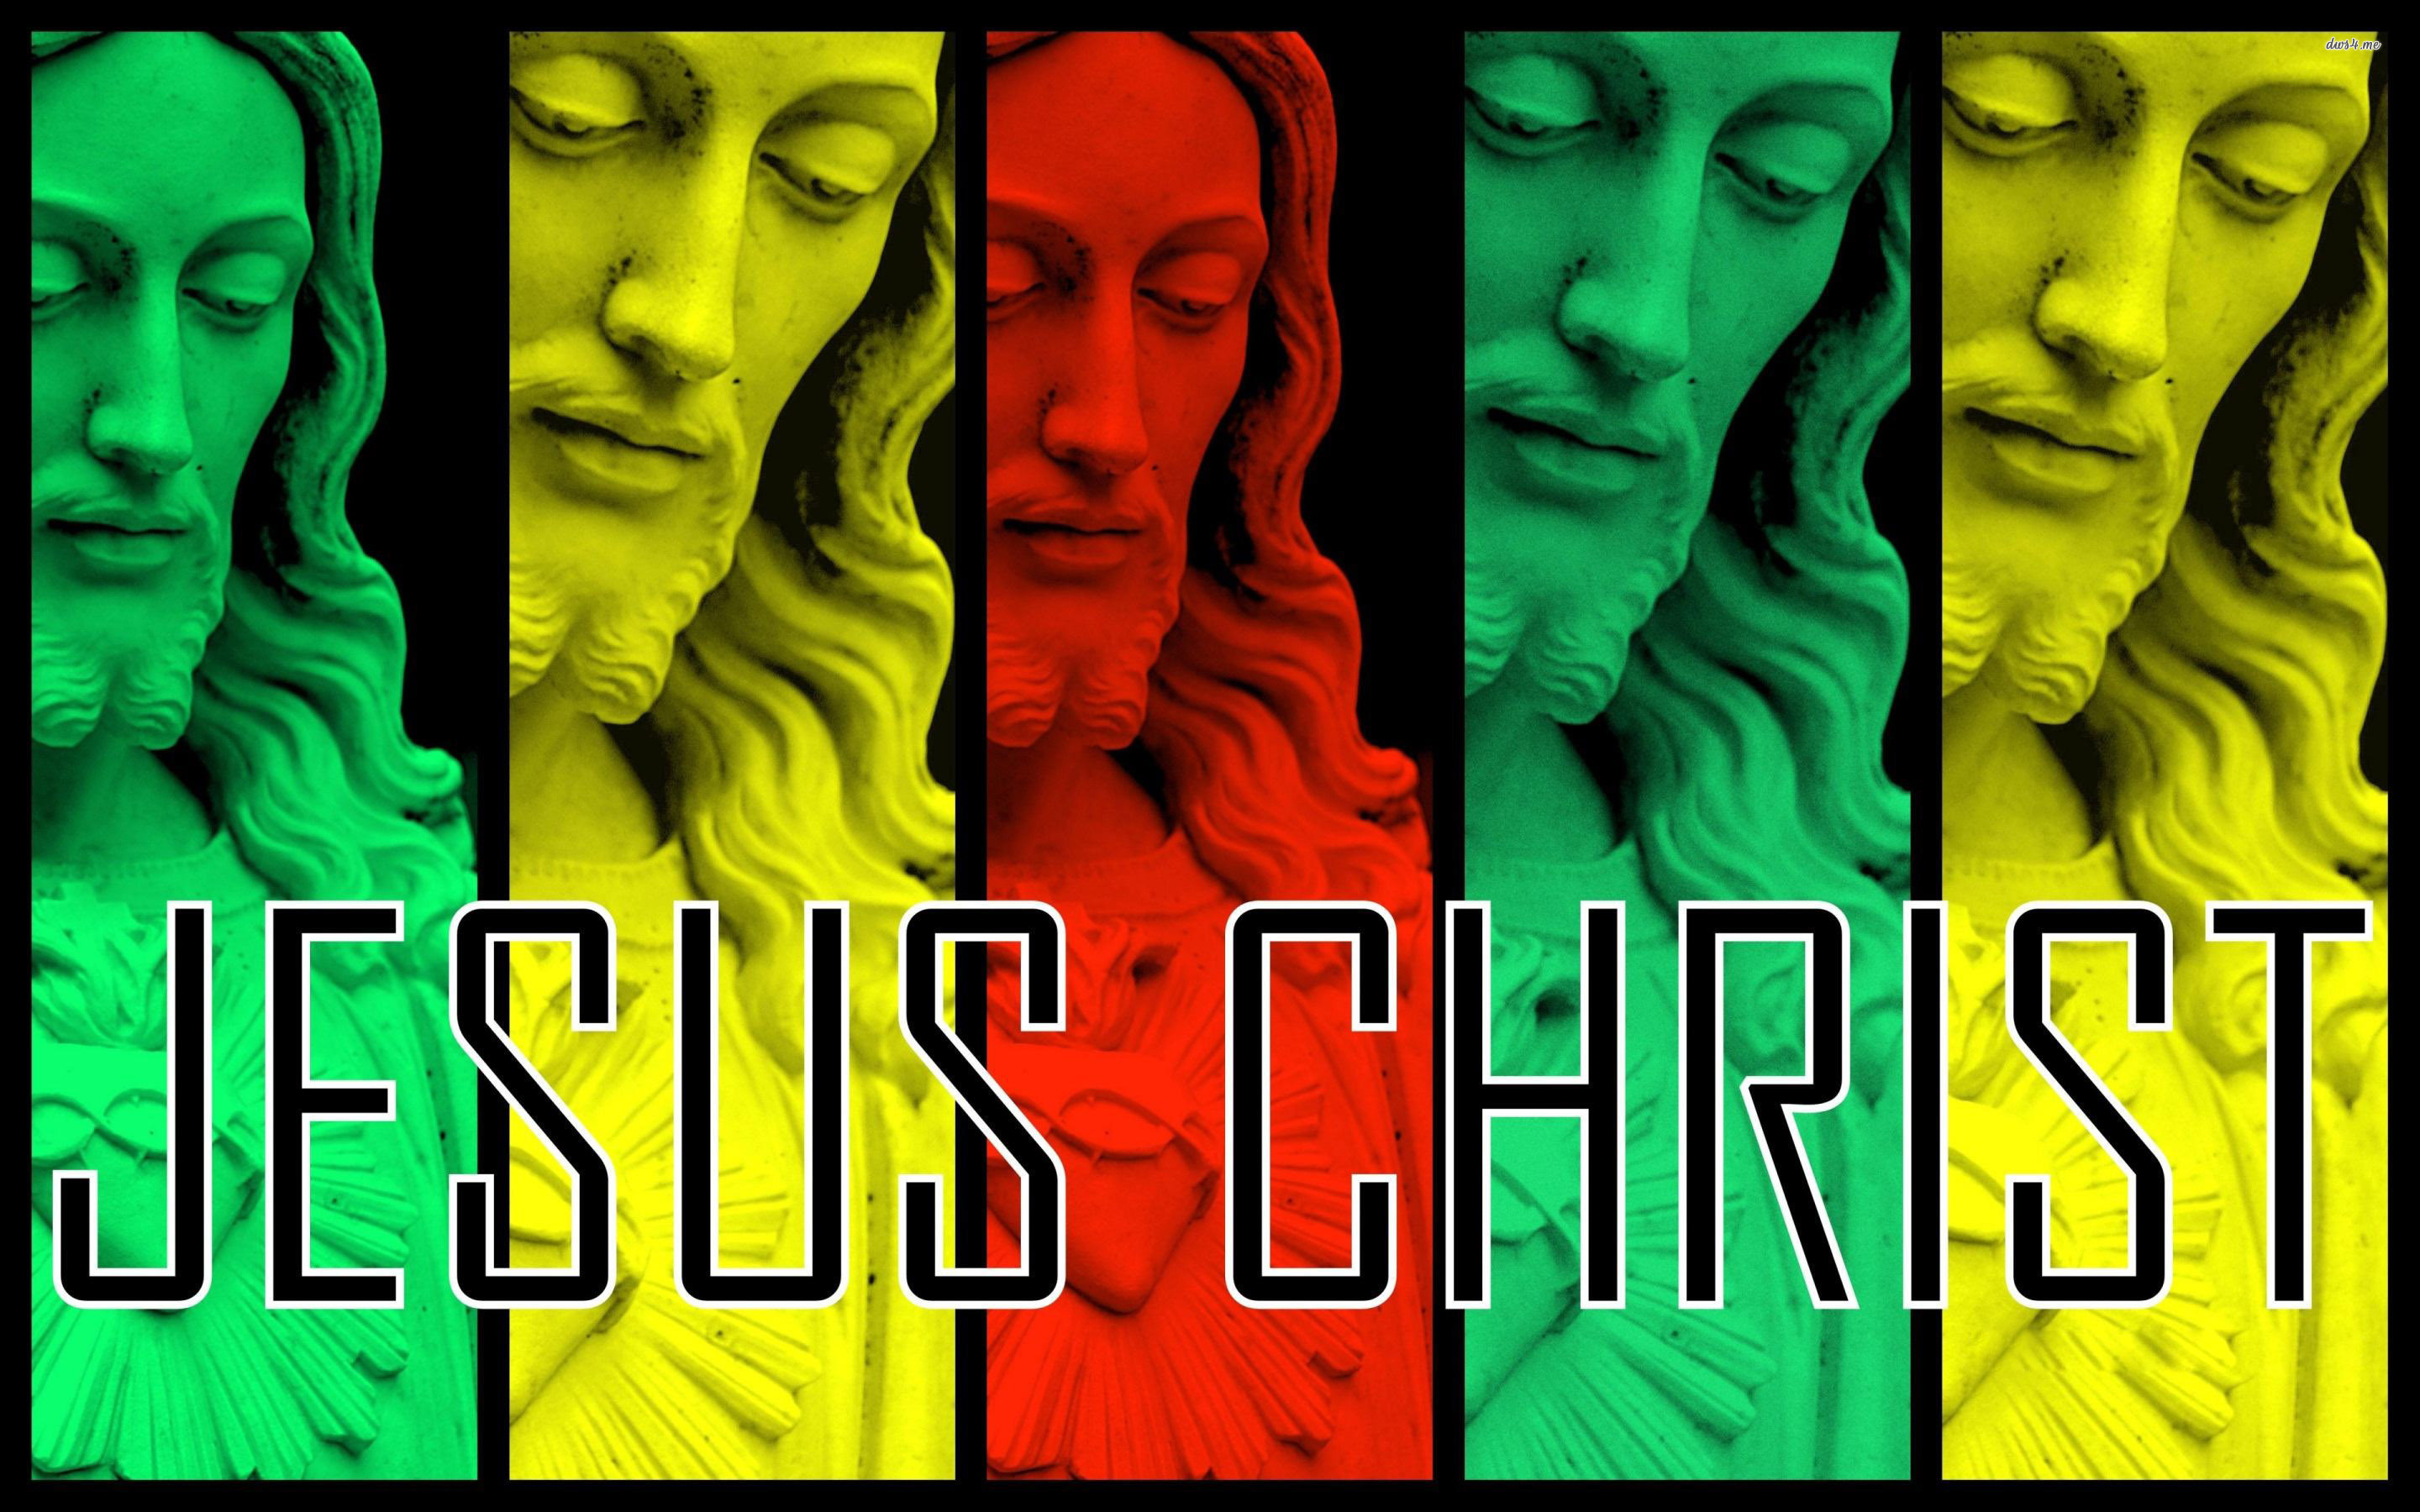 Jesus pictures A4